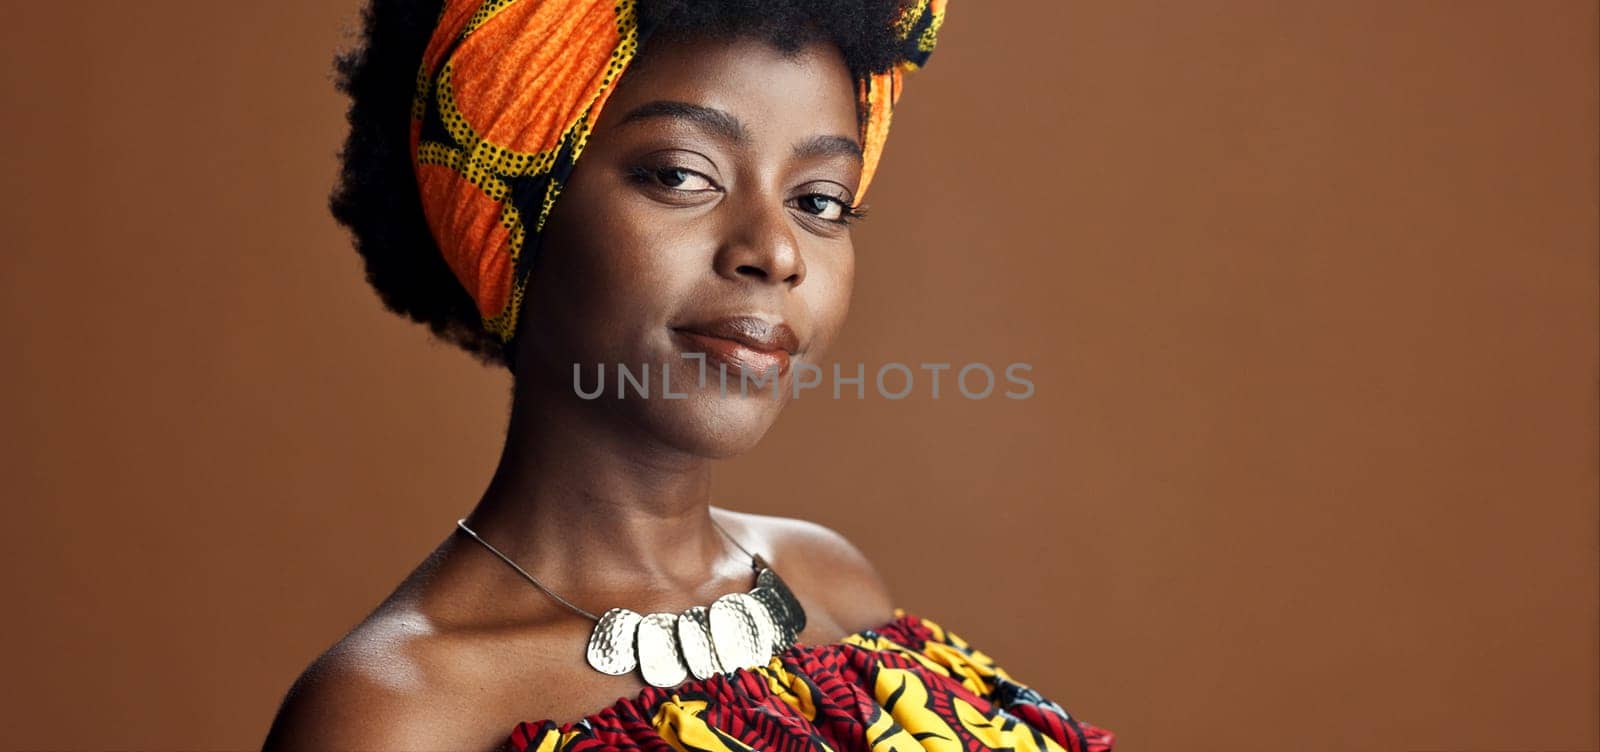 Culture, African fashion or face of black woman in studio on a brown background for trendy style. Unique, beauty or model with confidence, pride or afro posing in wrap, clothes or traditional outfit.